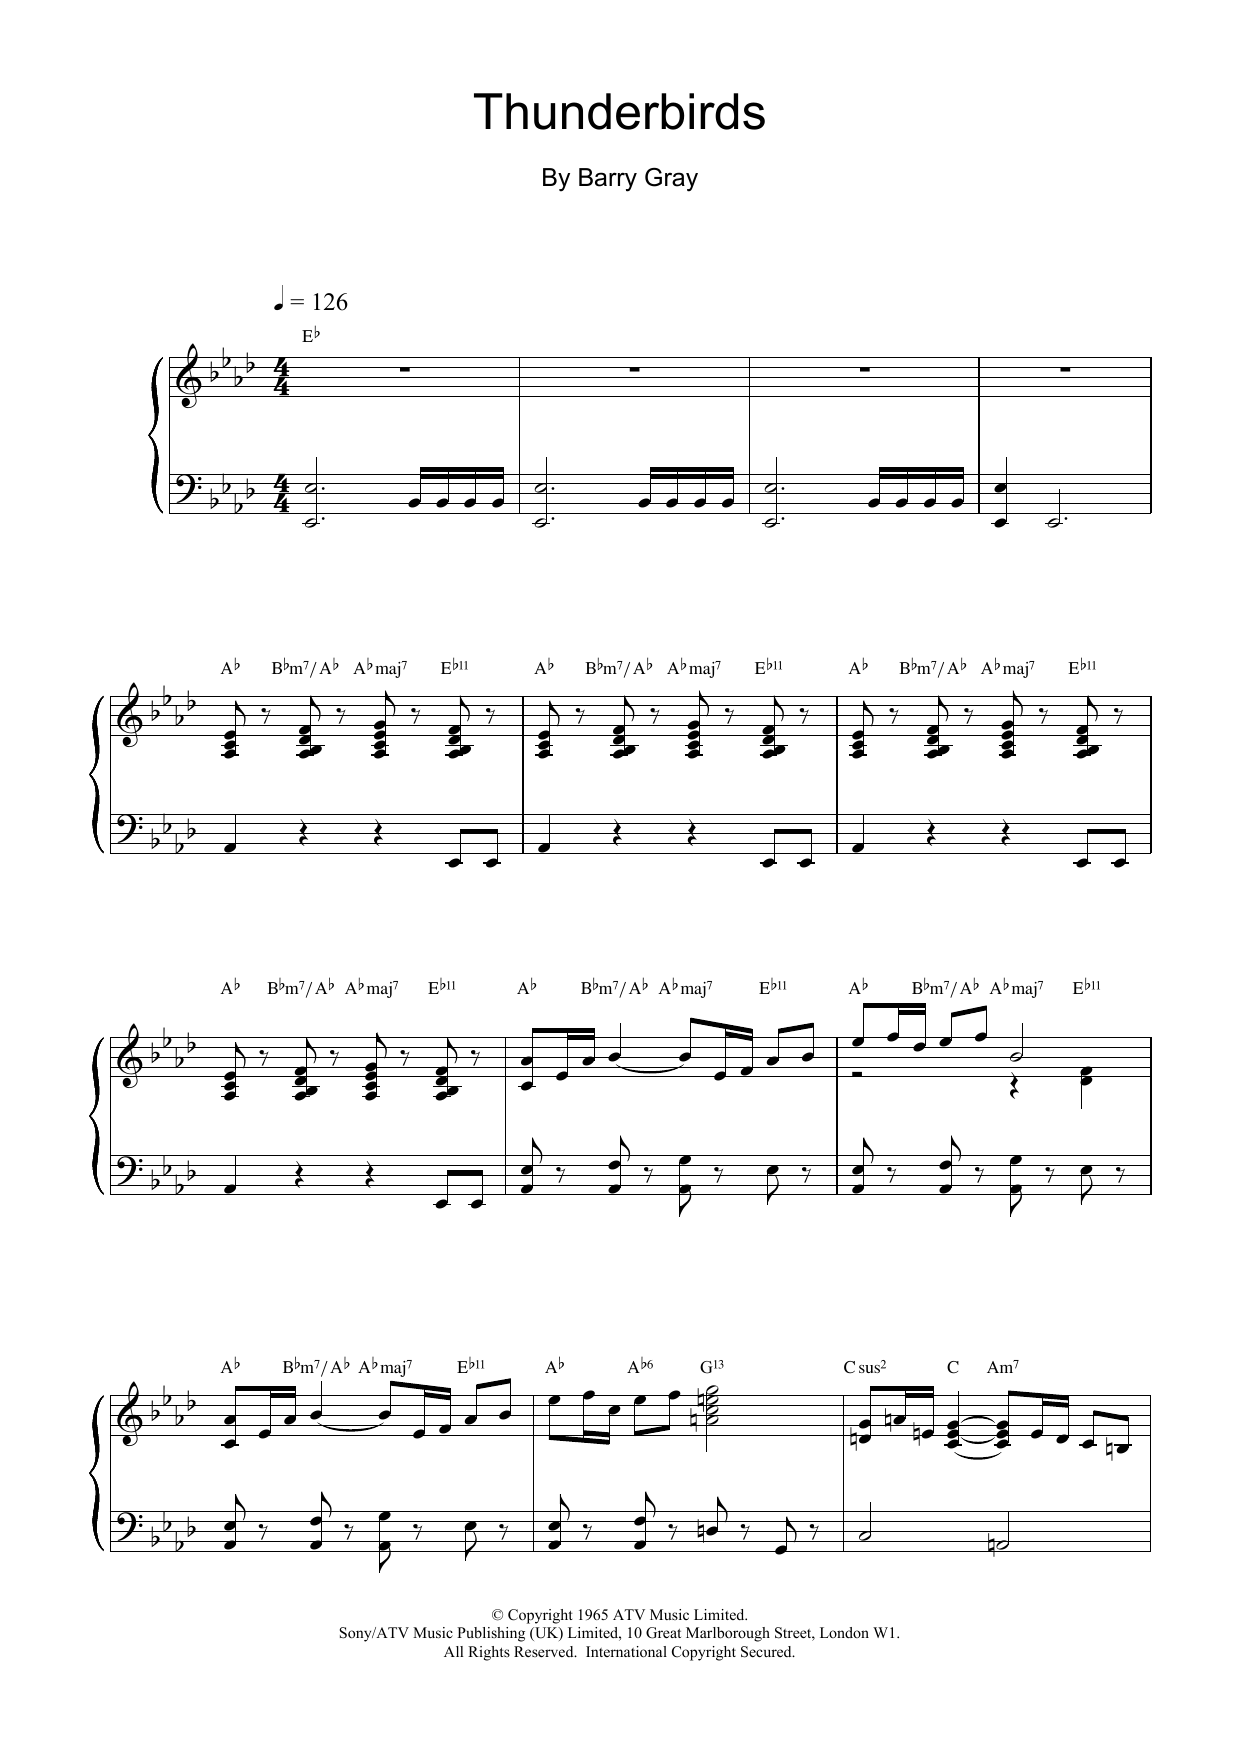 Barry Gray Thunderbirds sheet music notes and chords. Download Printable PDF.